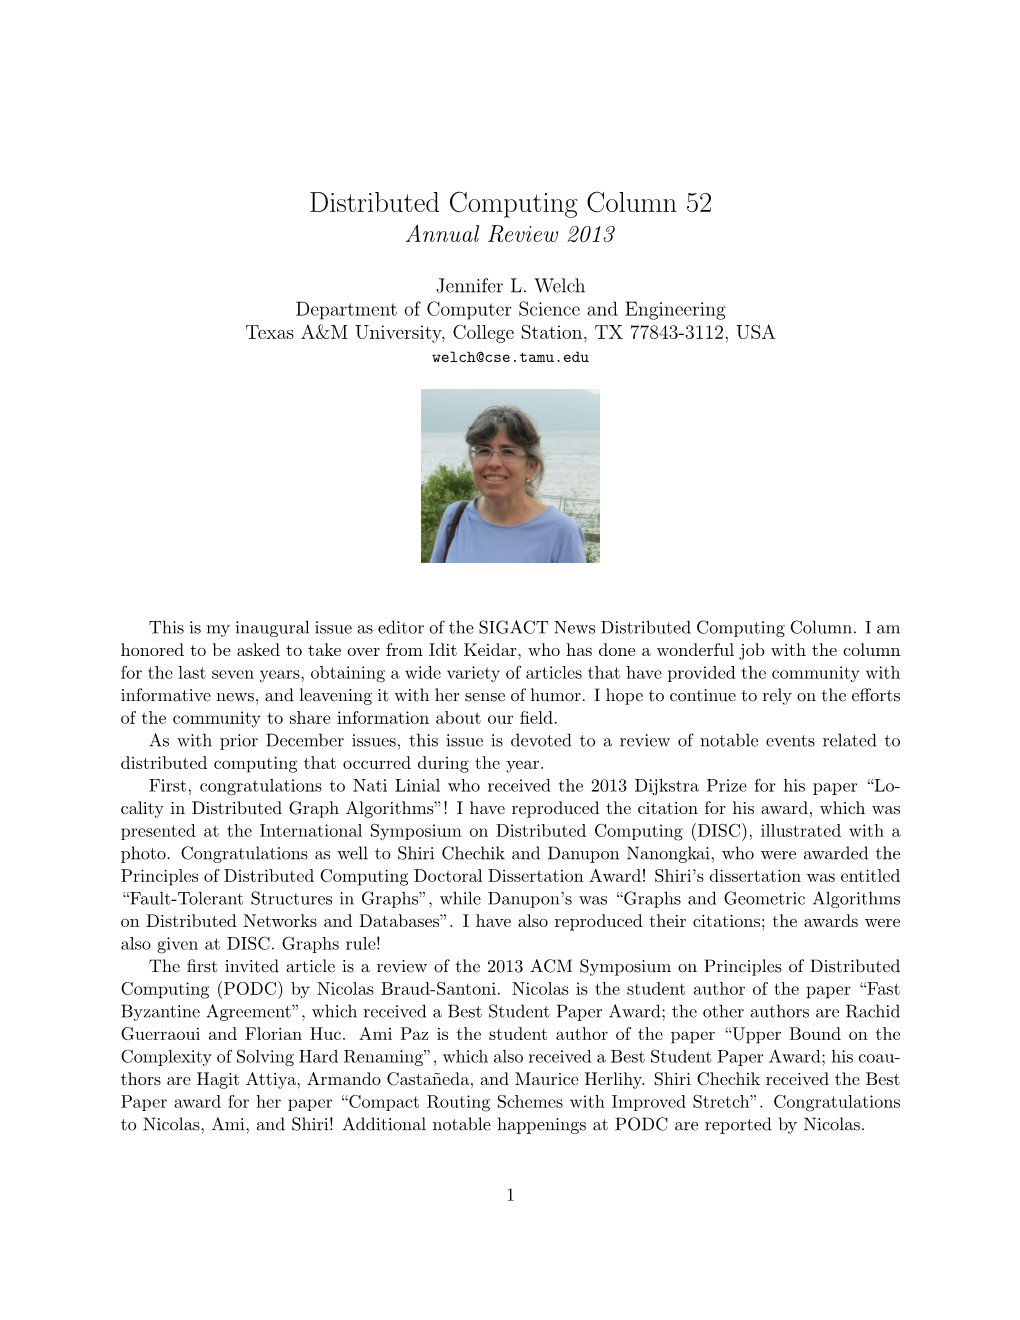 Distributed Computing Column 52 Annual Review 2013